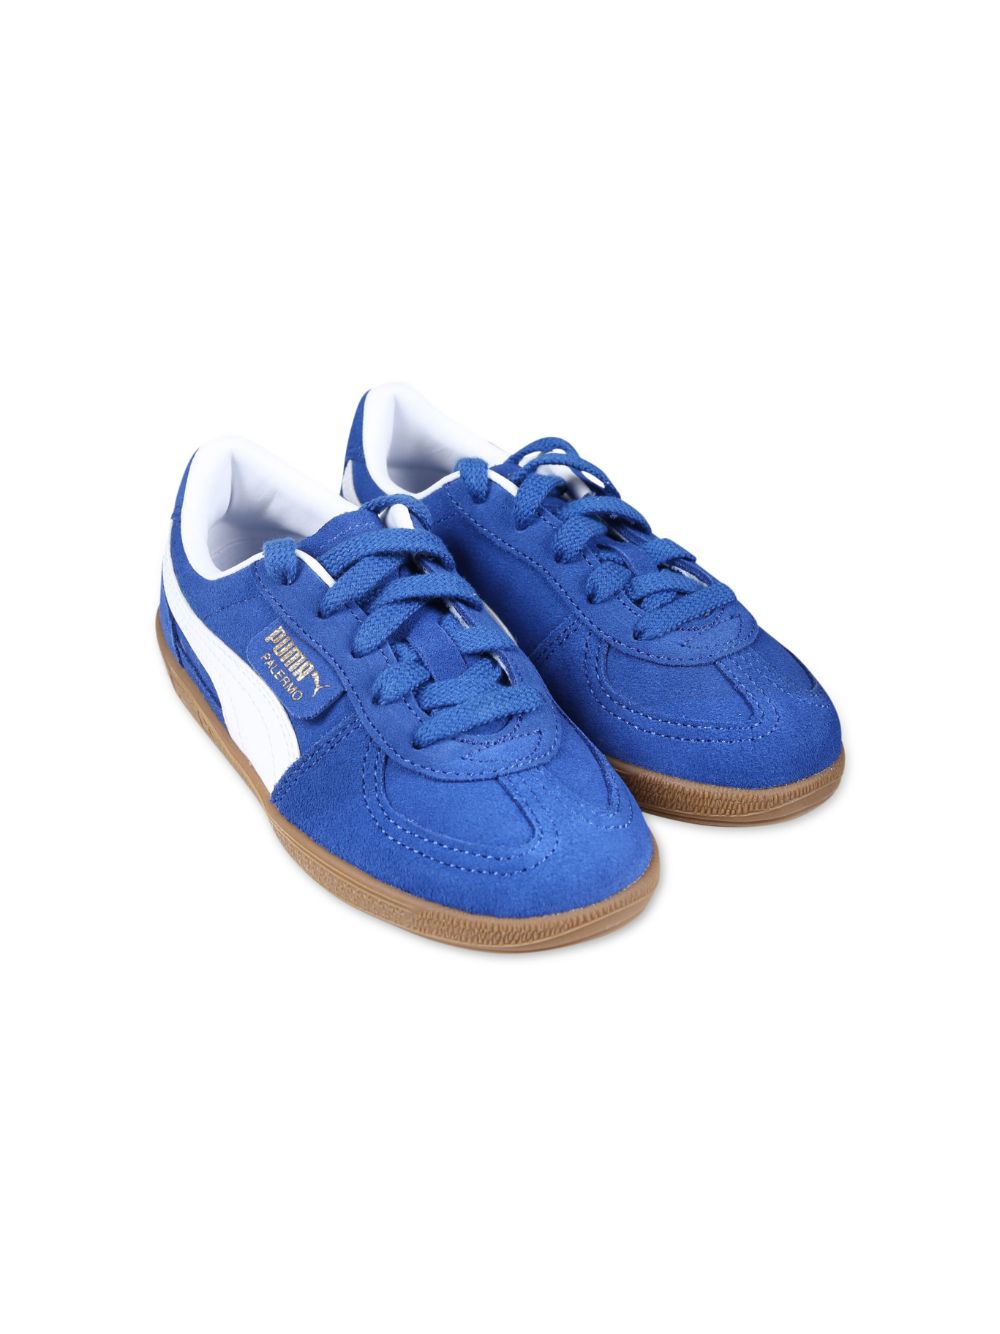 Image 2 of Puma Kids Palermo suede sneakers